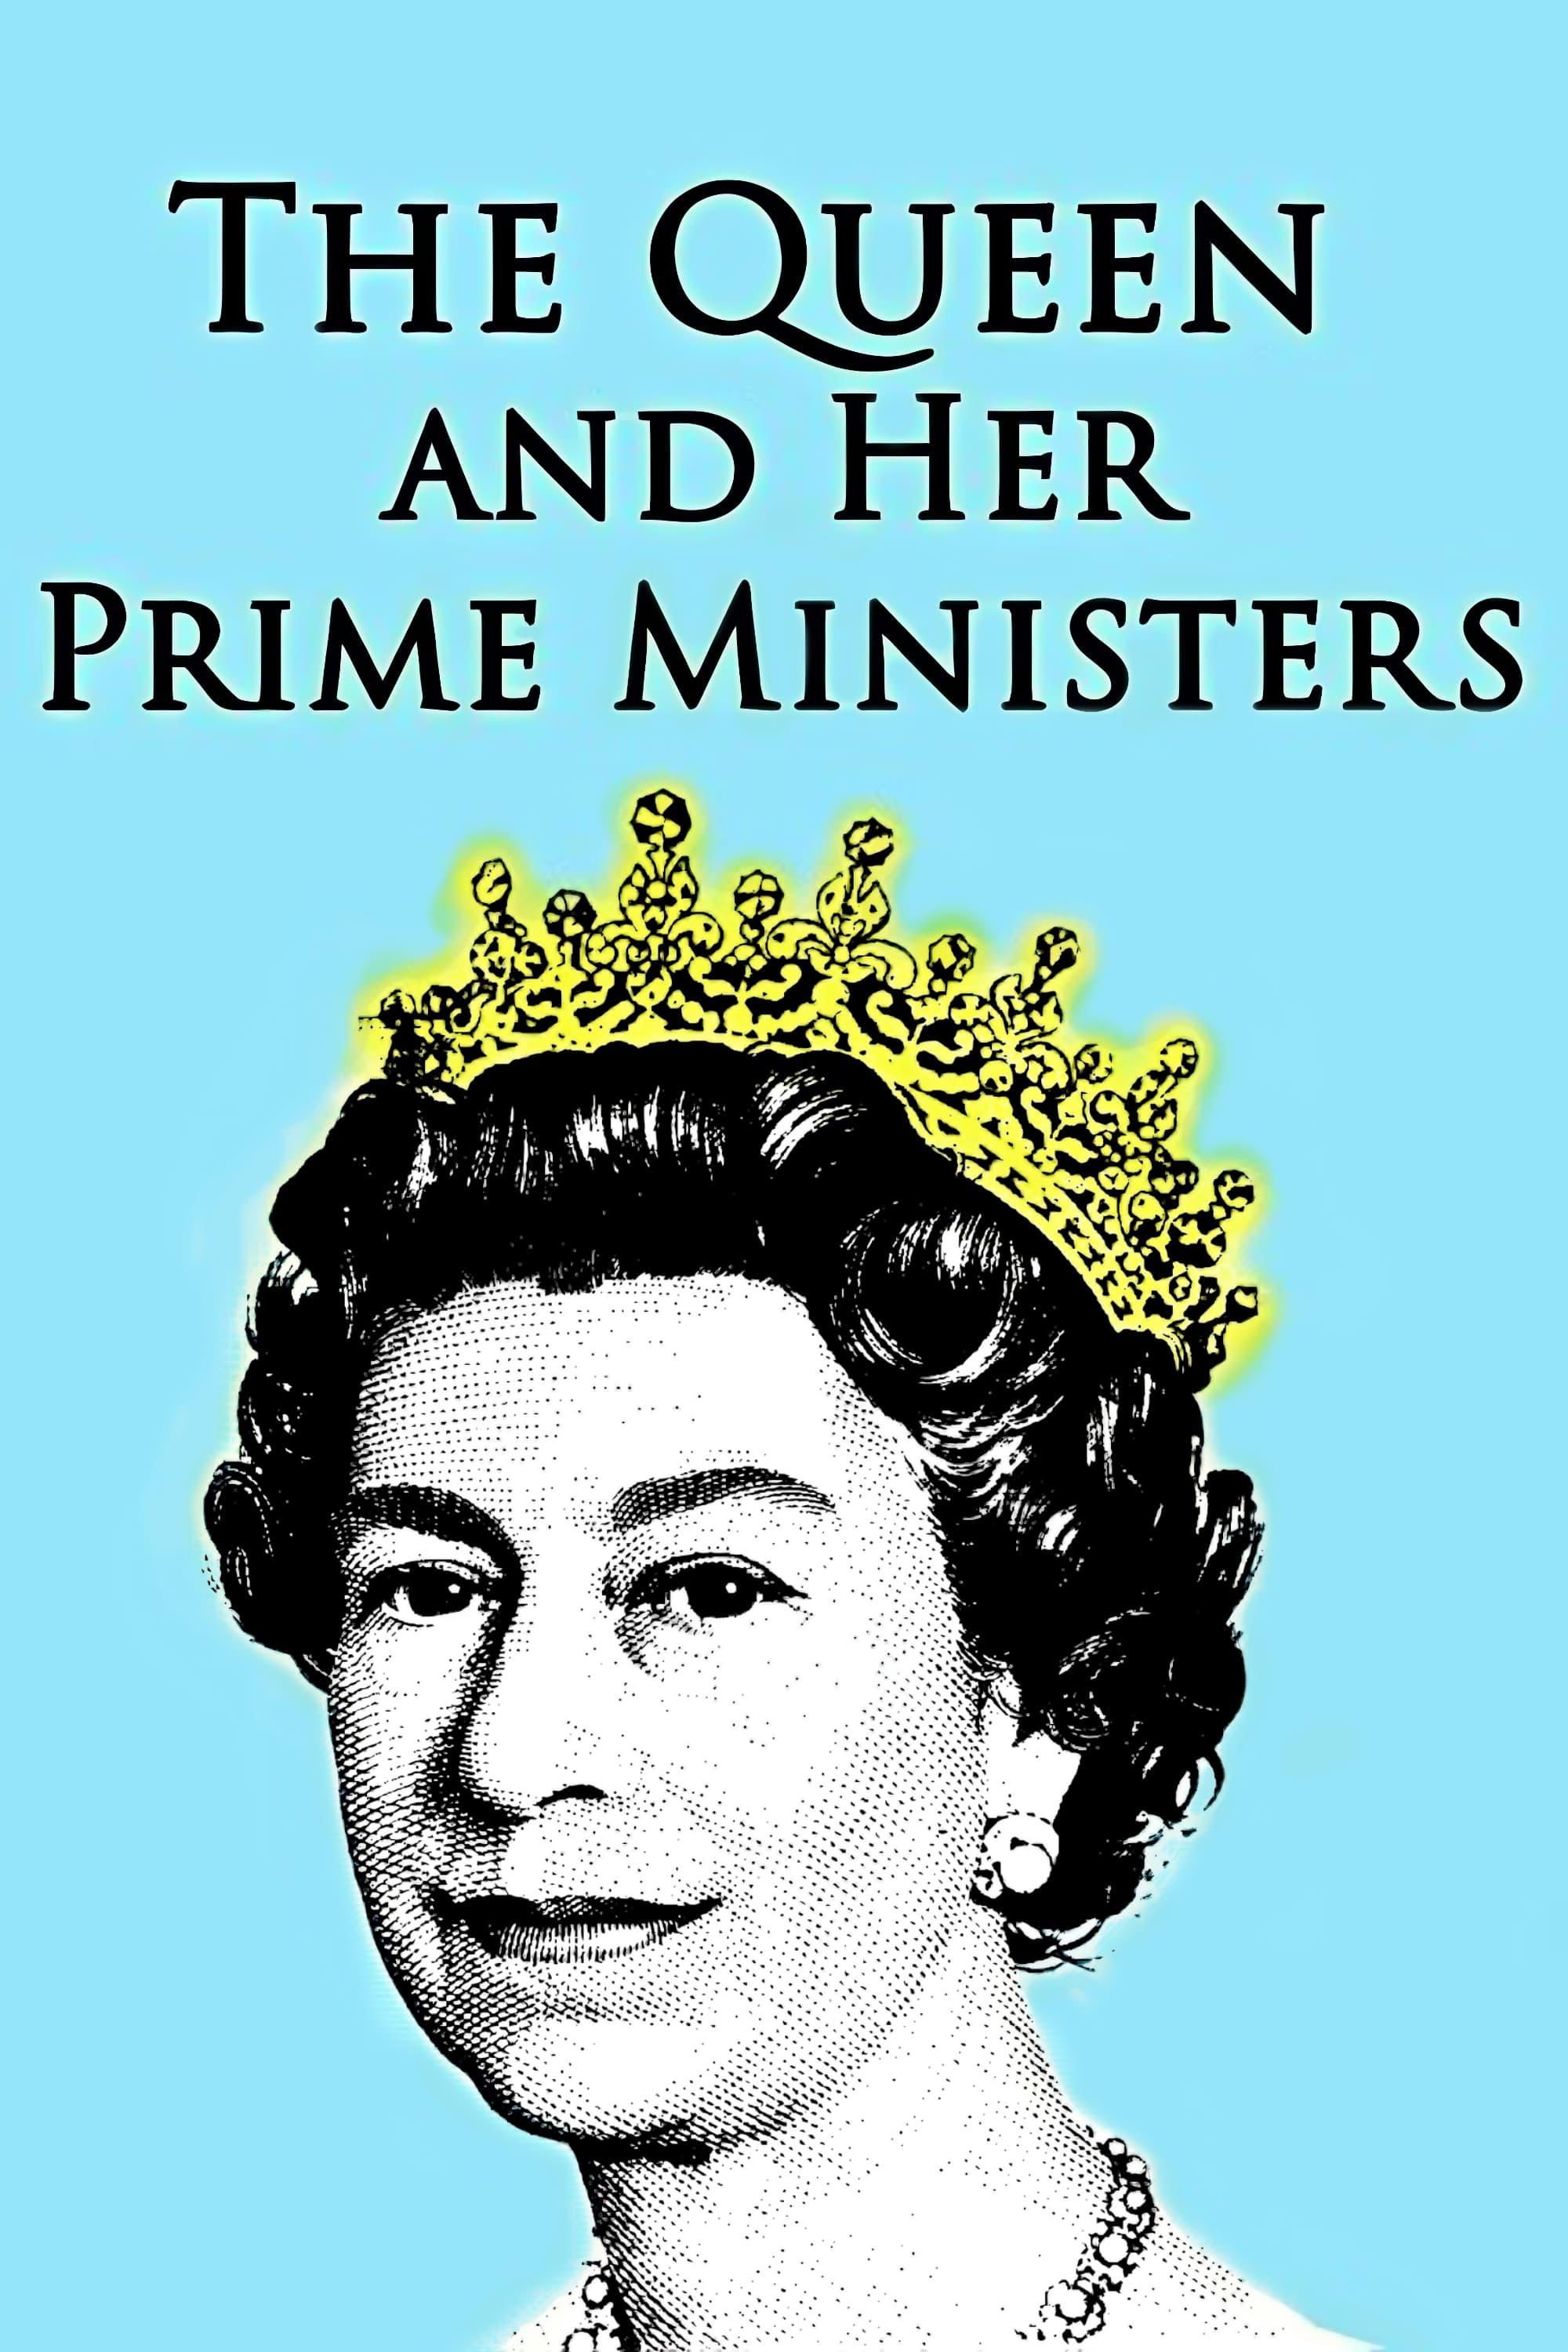 The Queen and Her Prime Ministers poster